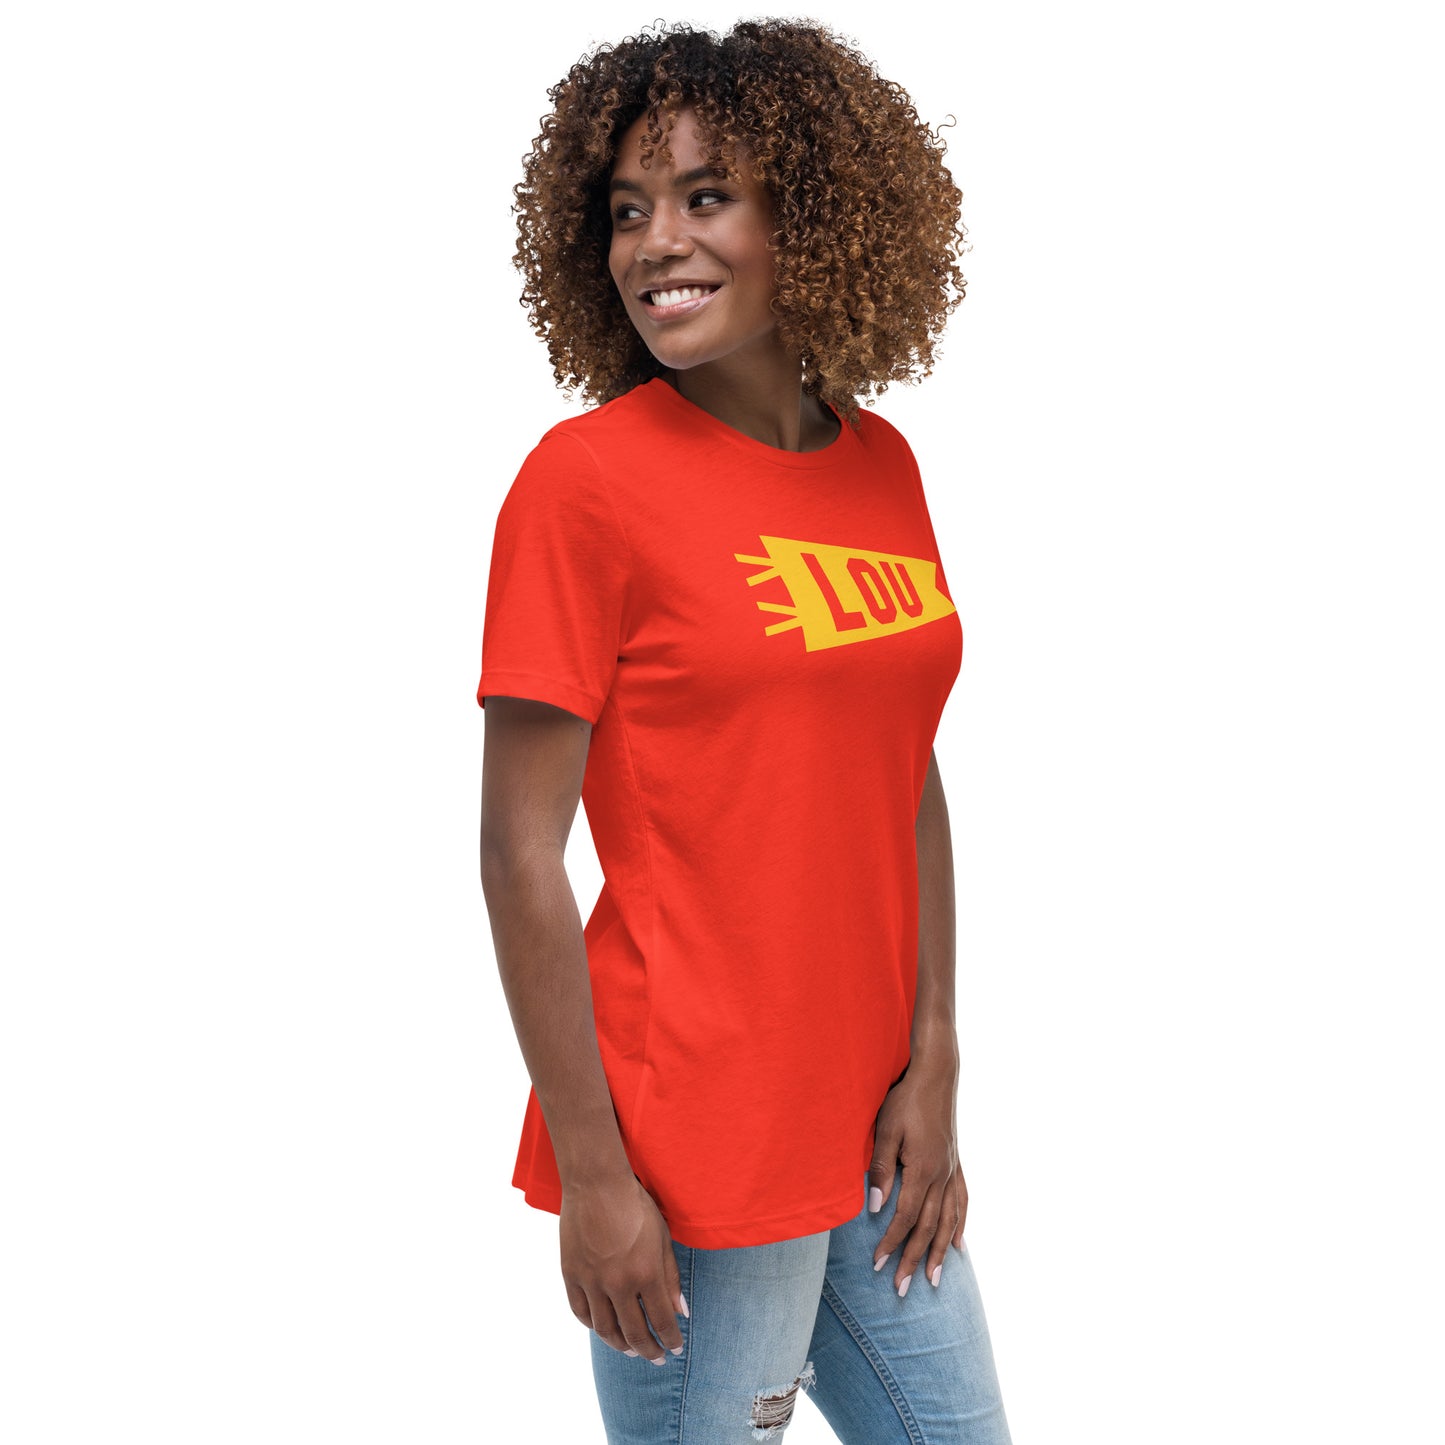 Airport Code Women's Tee - Yellow Graphic • LOU Louisville • YHM Designs - Image 03